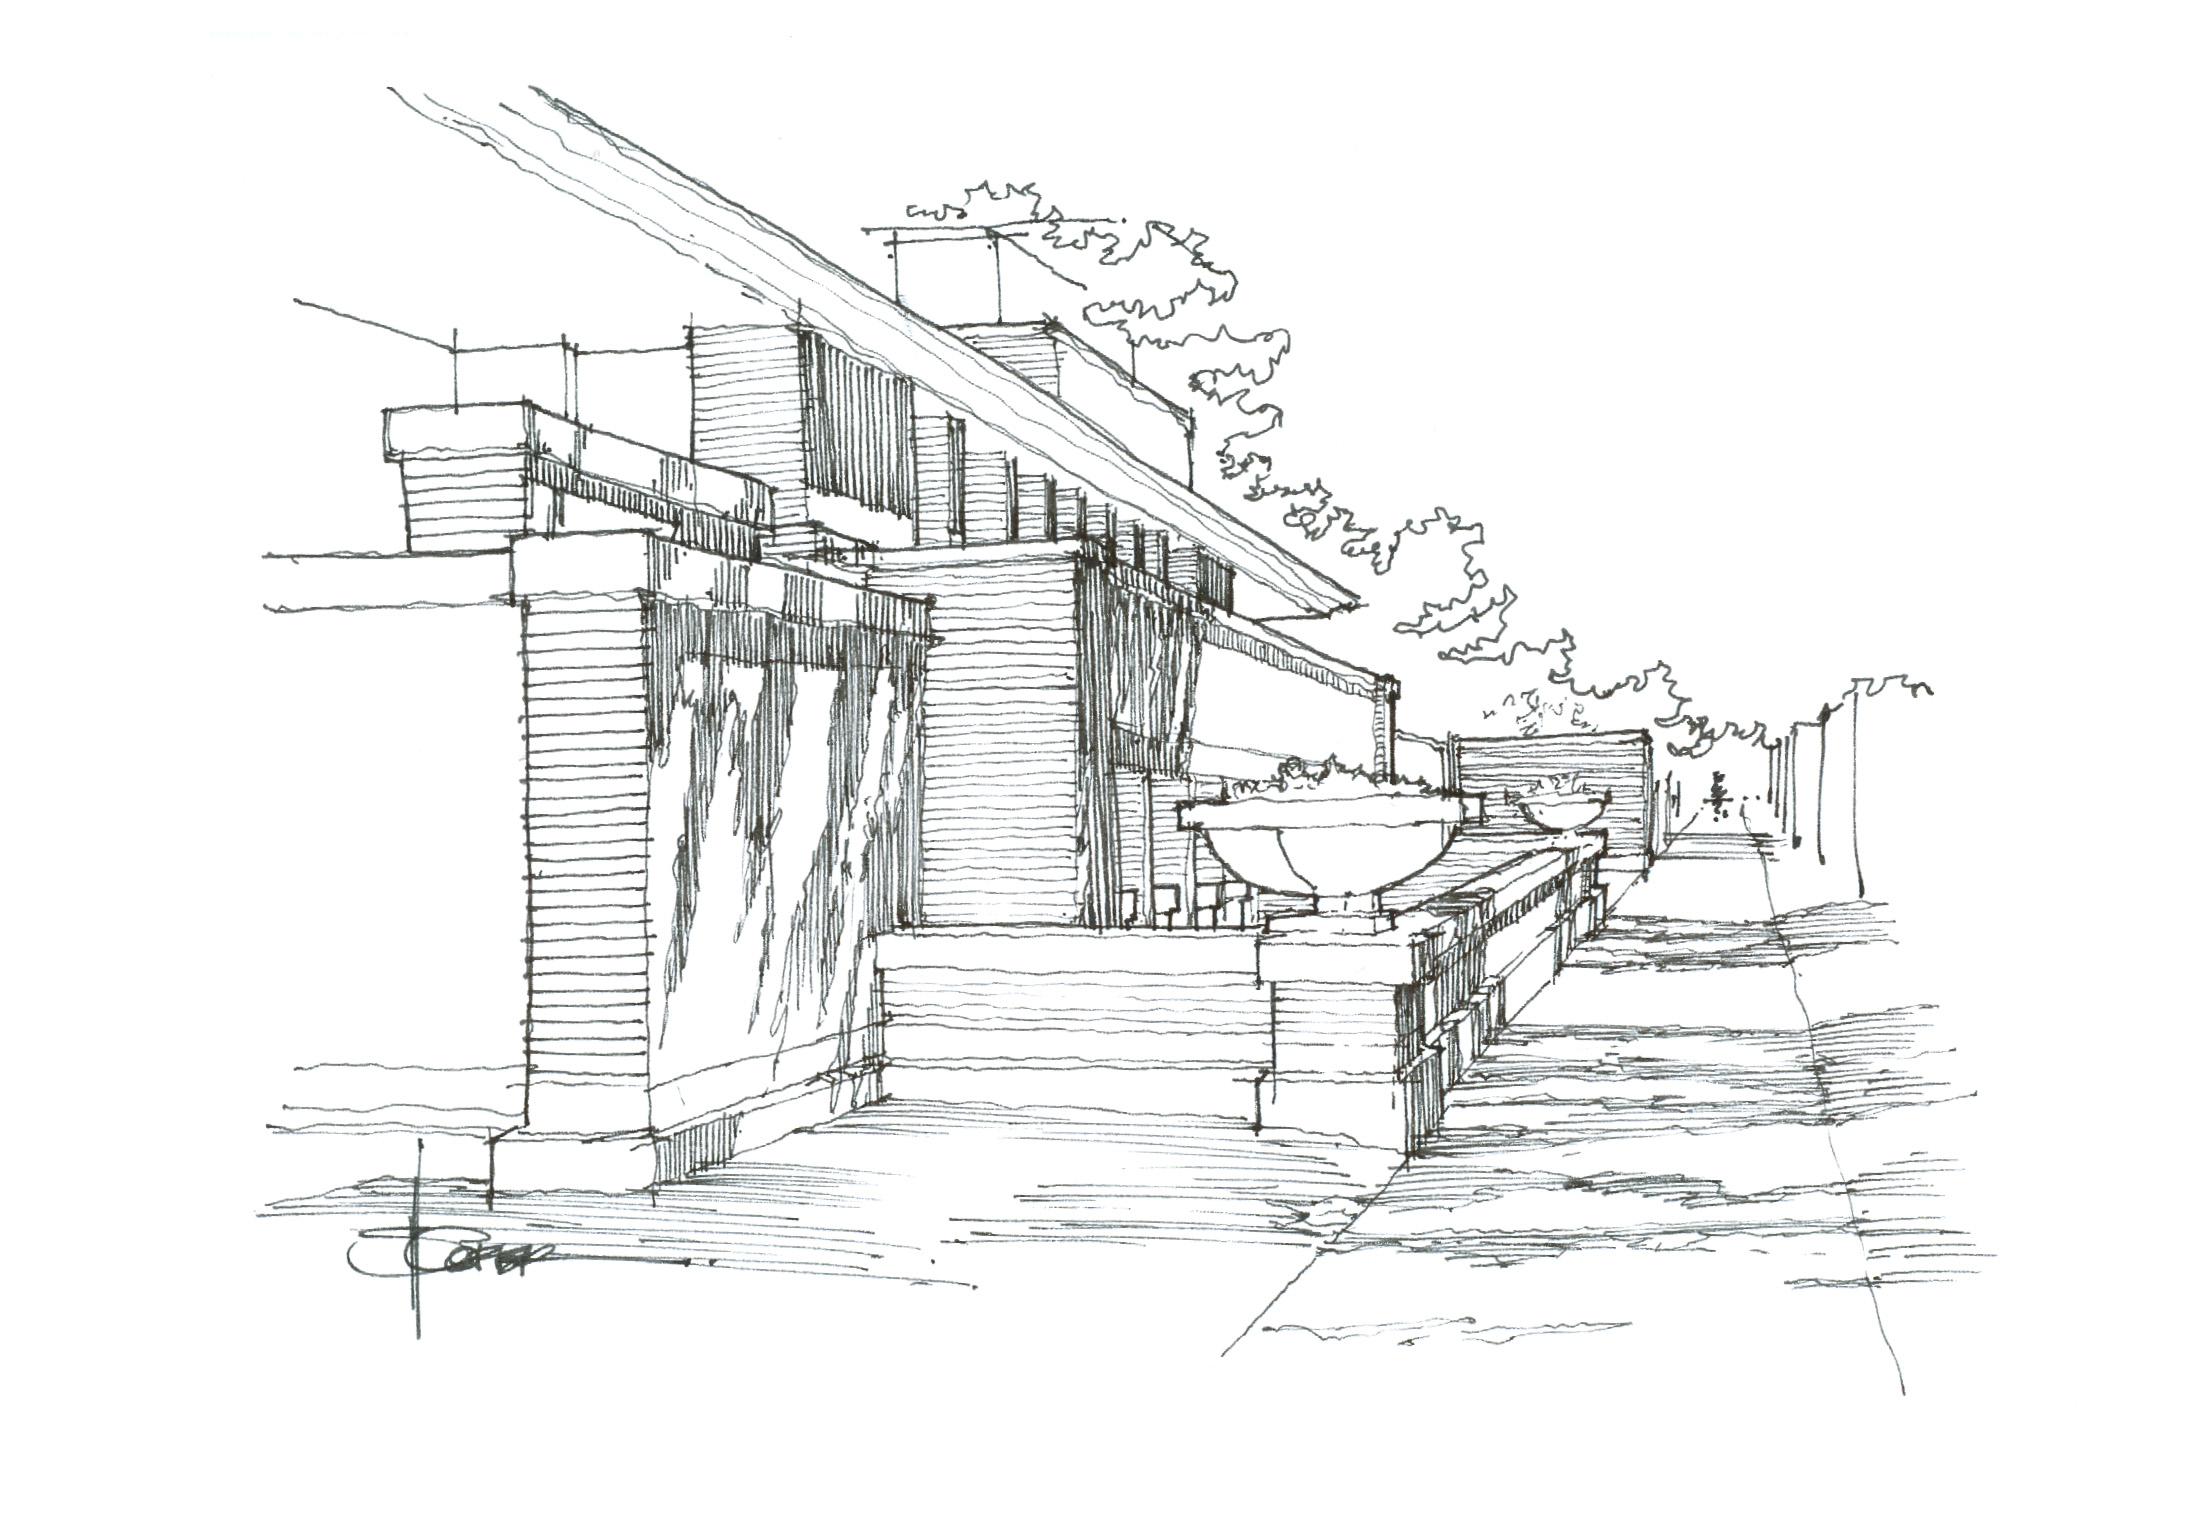 Fountain Pen and Ink sketch of the Robie Residence by Frank Lloyd Wright in Chicago, Illinois.